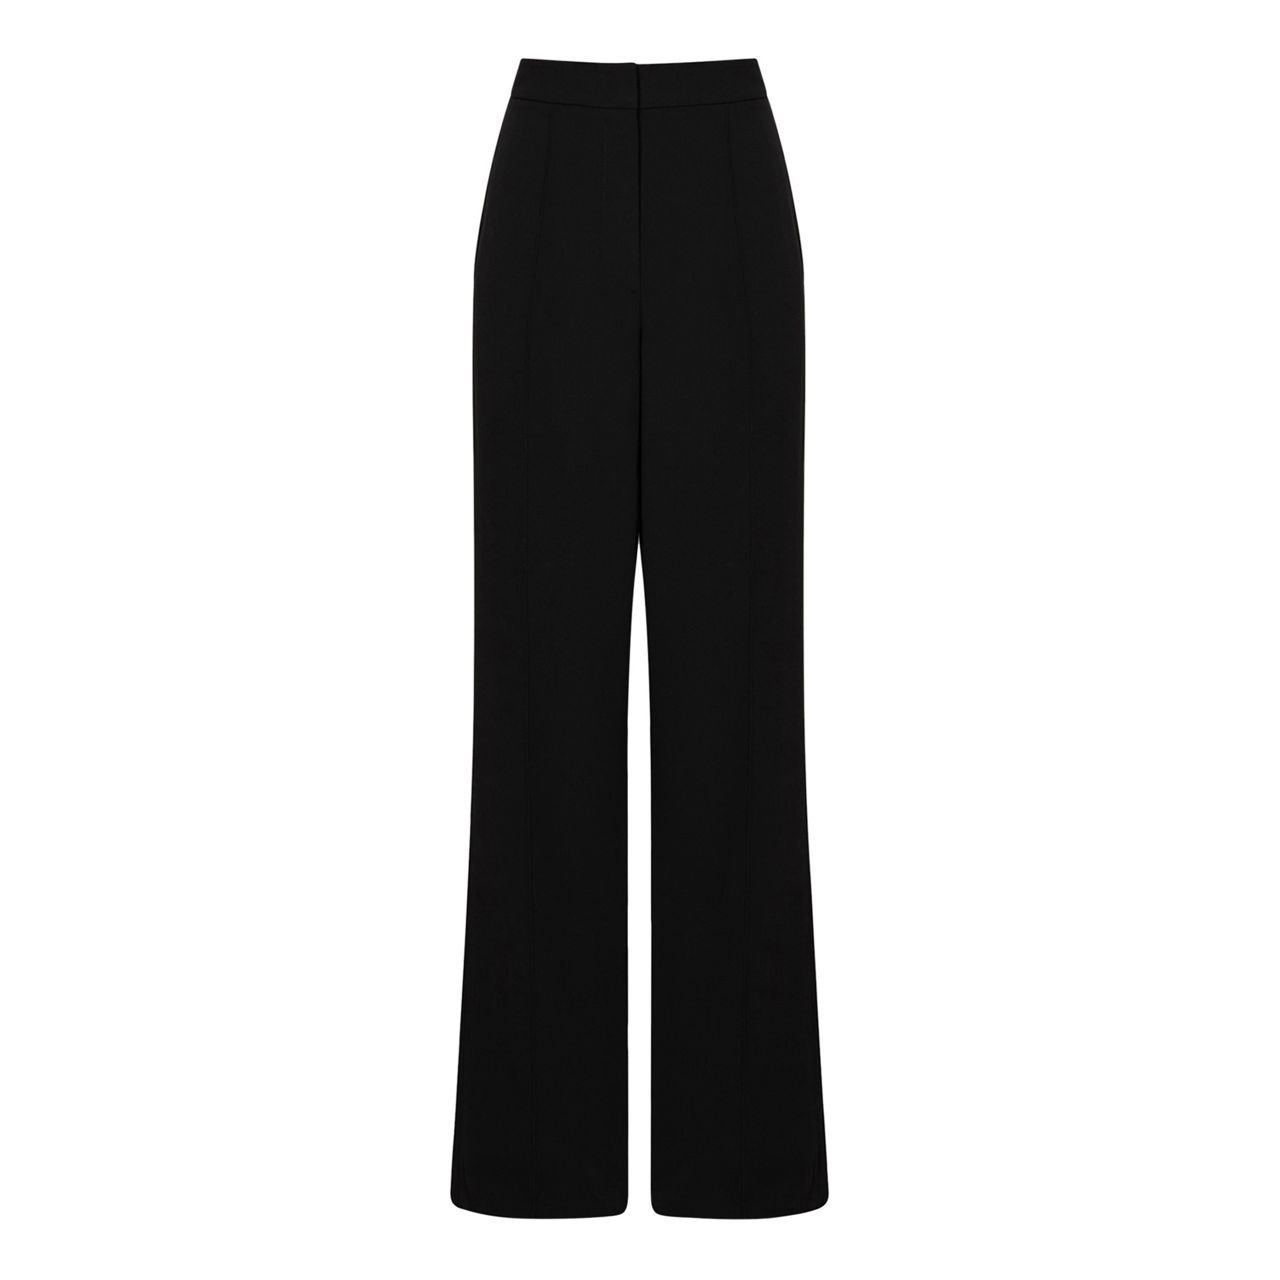 REISS Aleah Tailored Trousers